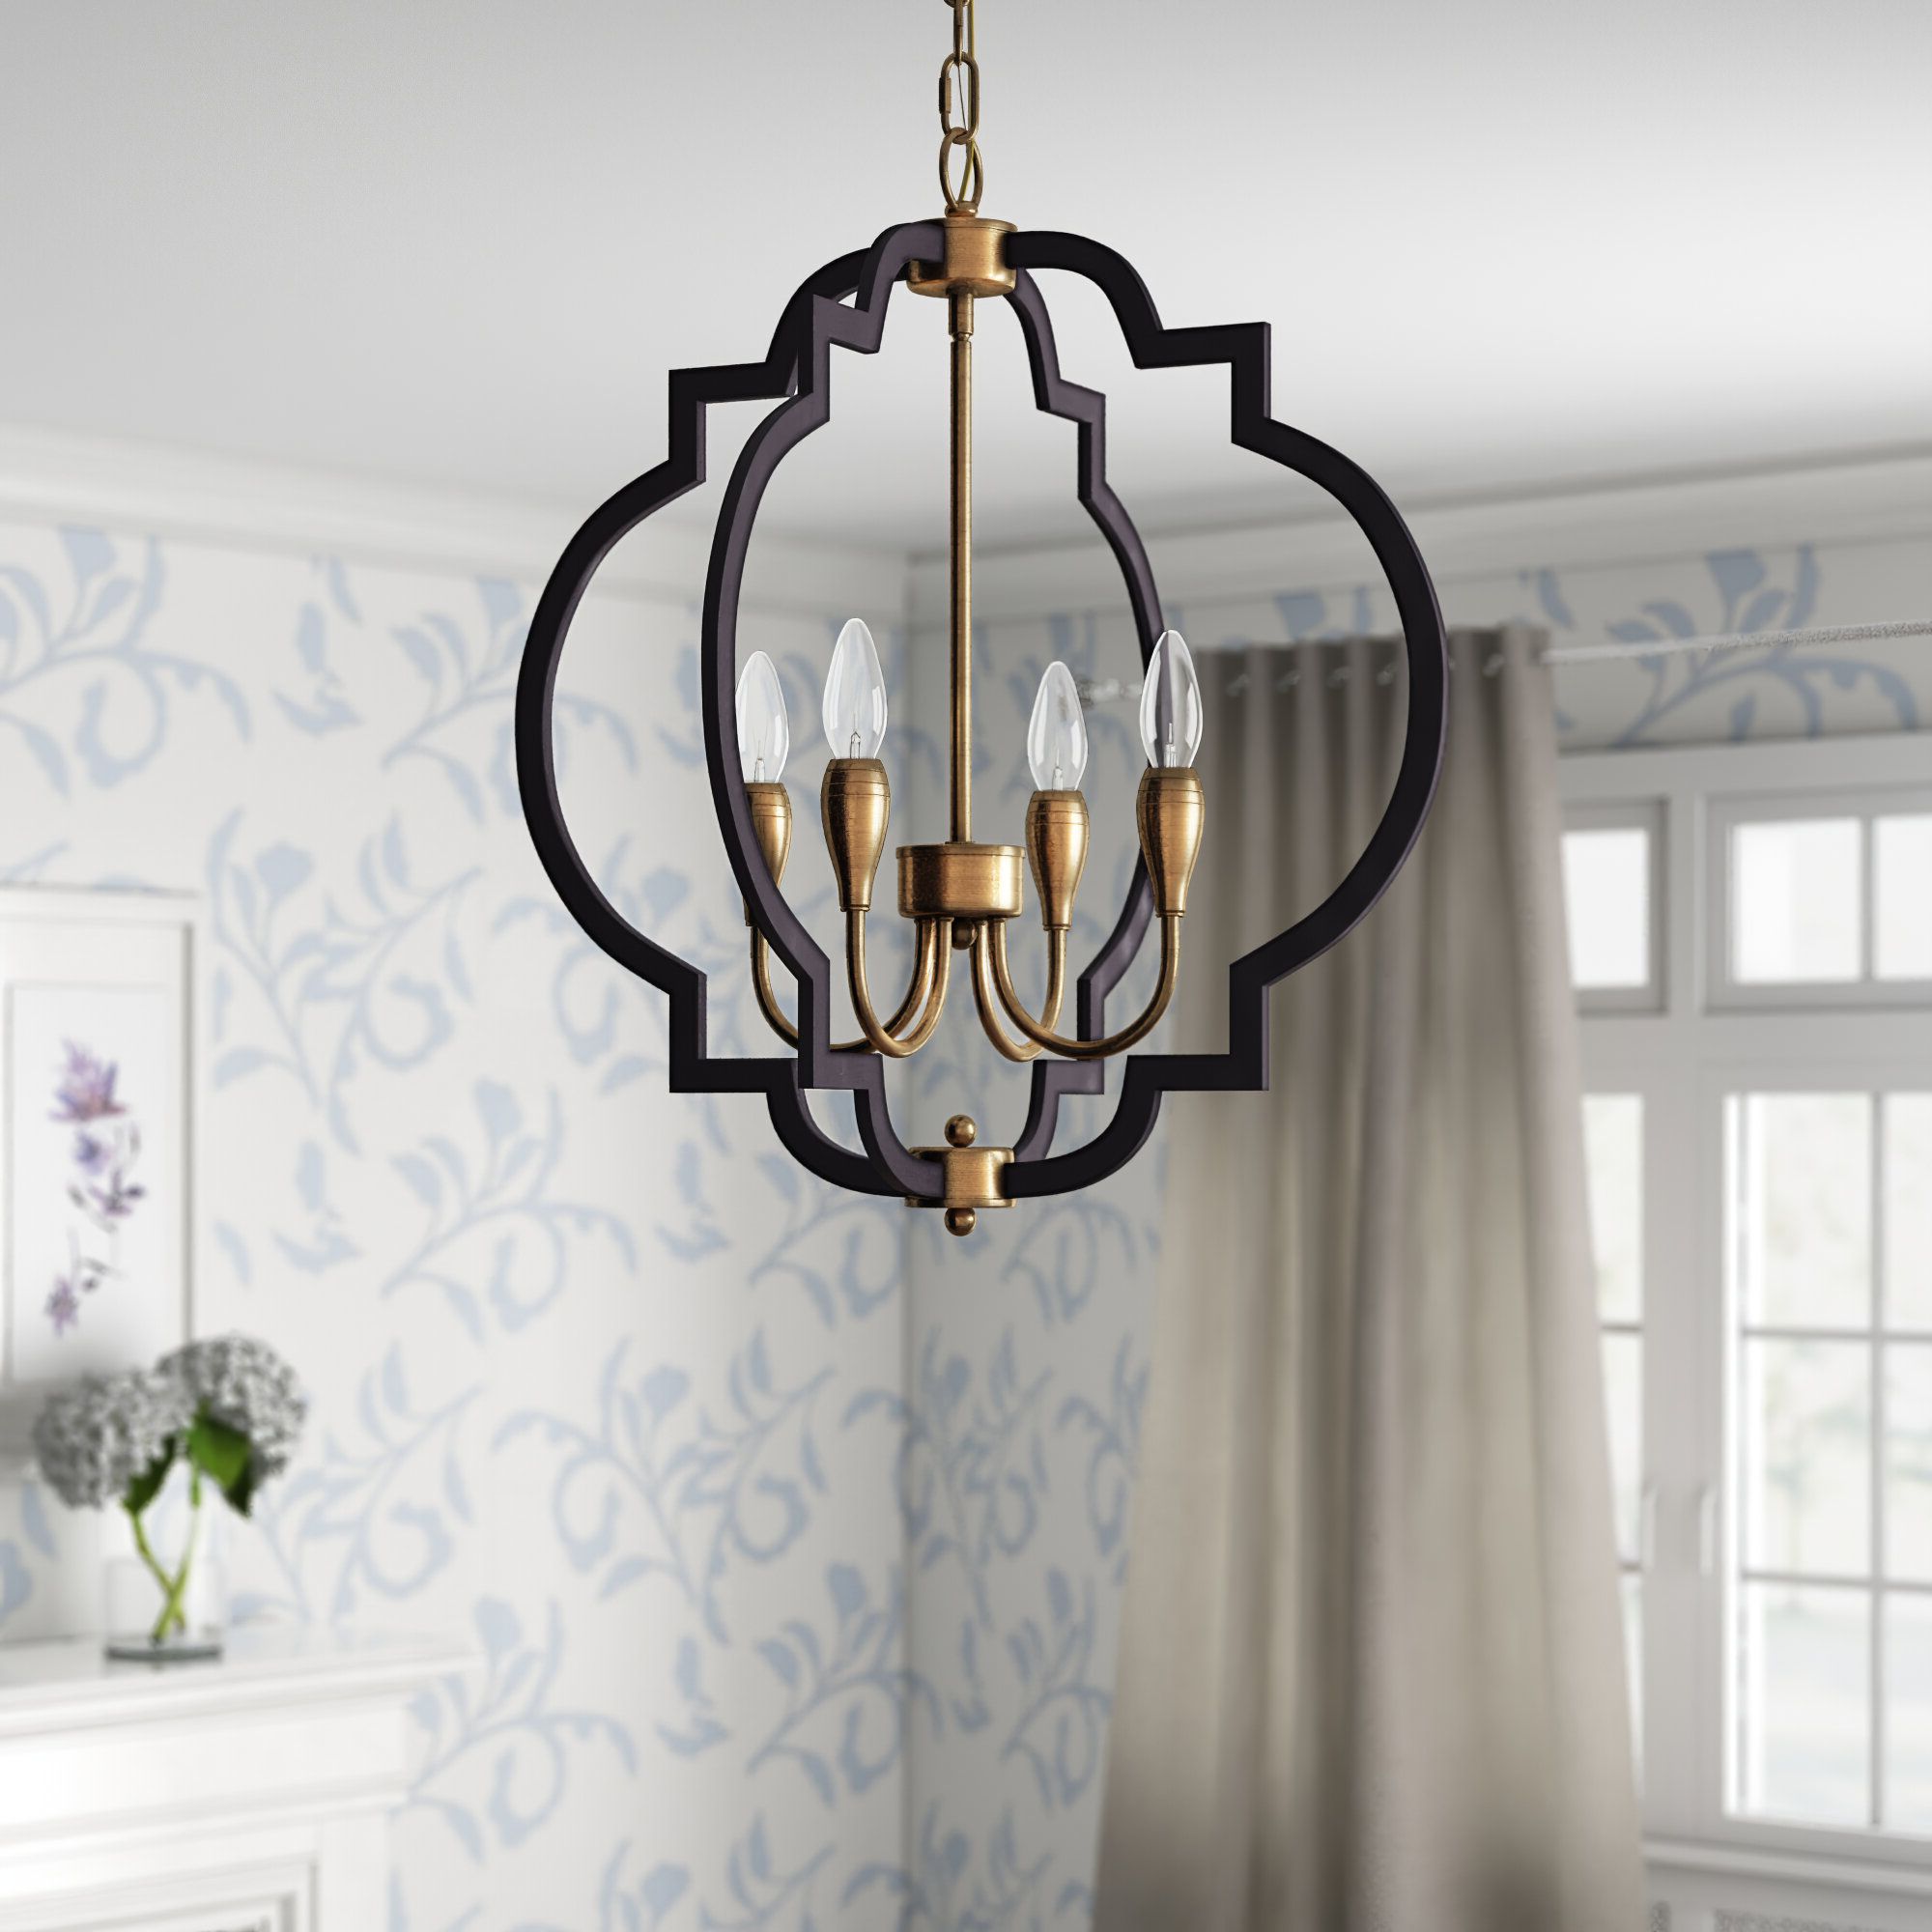 Astin 4 Light Geometric Chandelier Intended For Trendy Bennington 4 Light Candle Style Chandeliers (View 16 of 25)